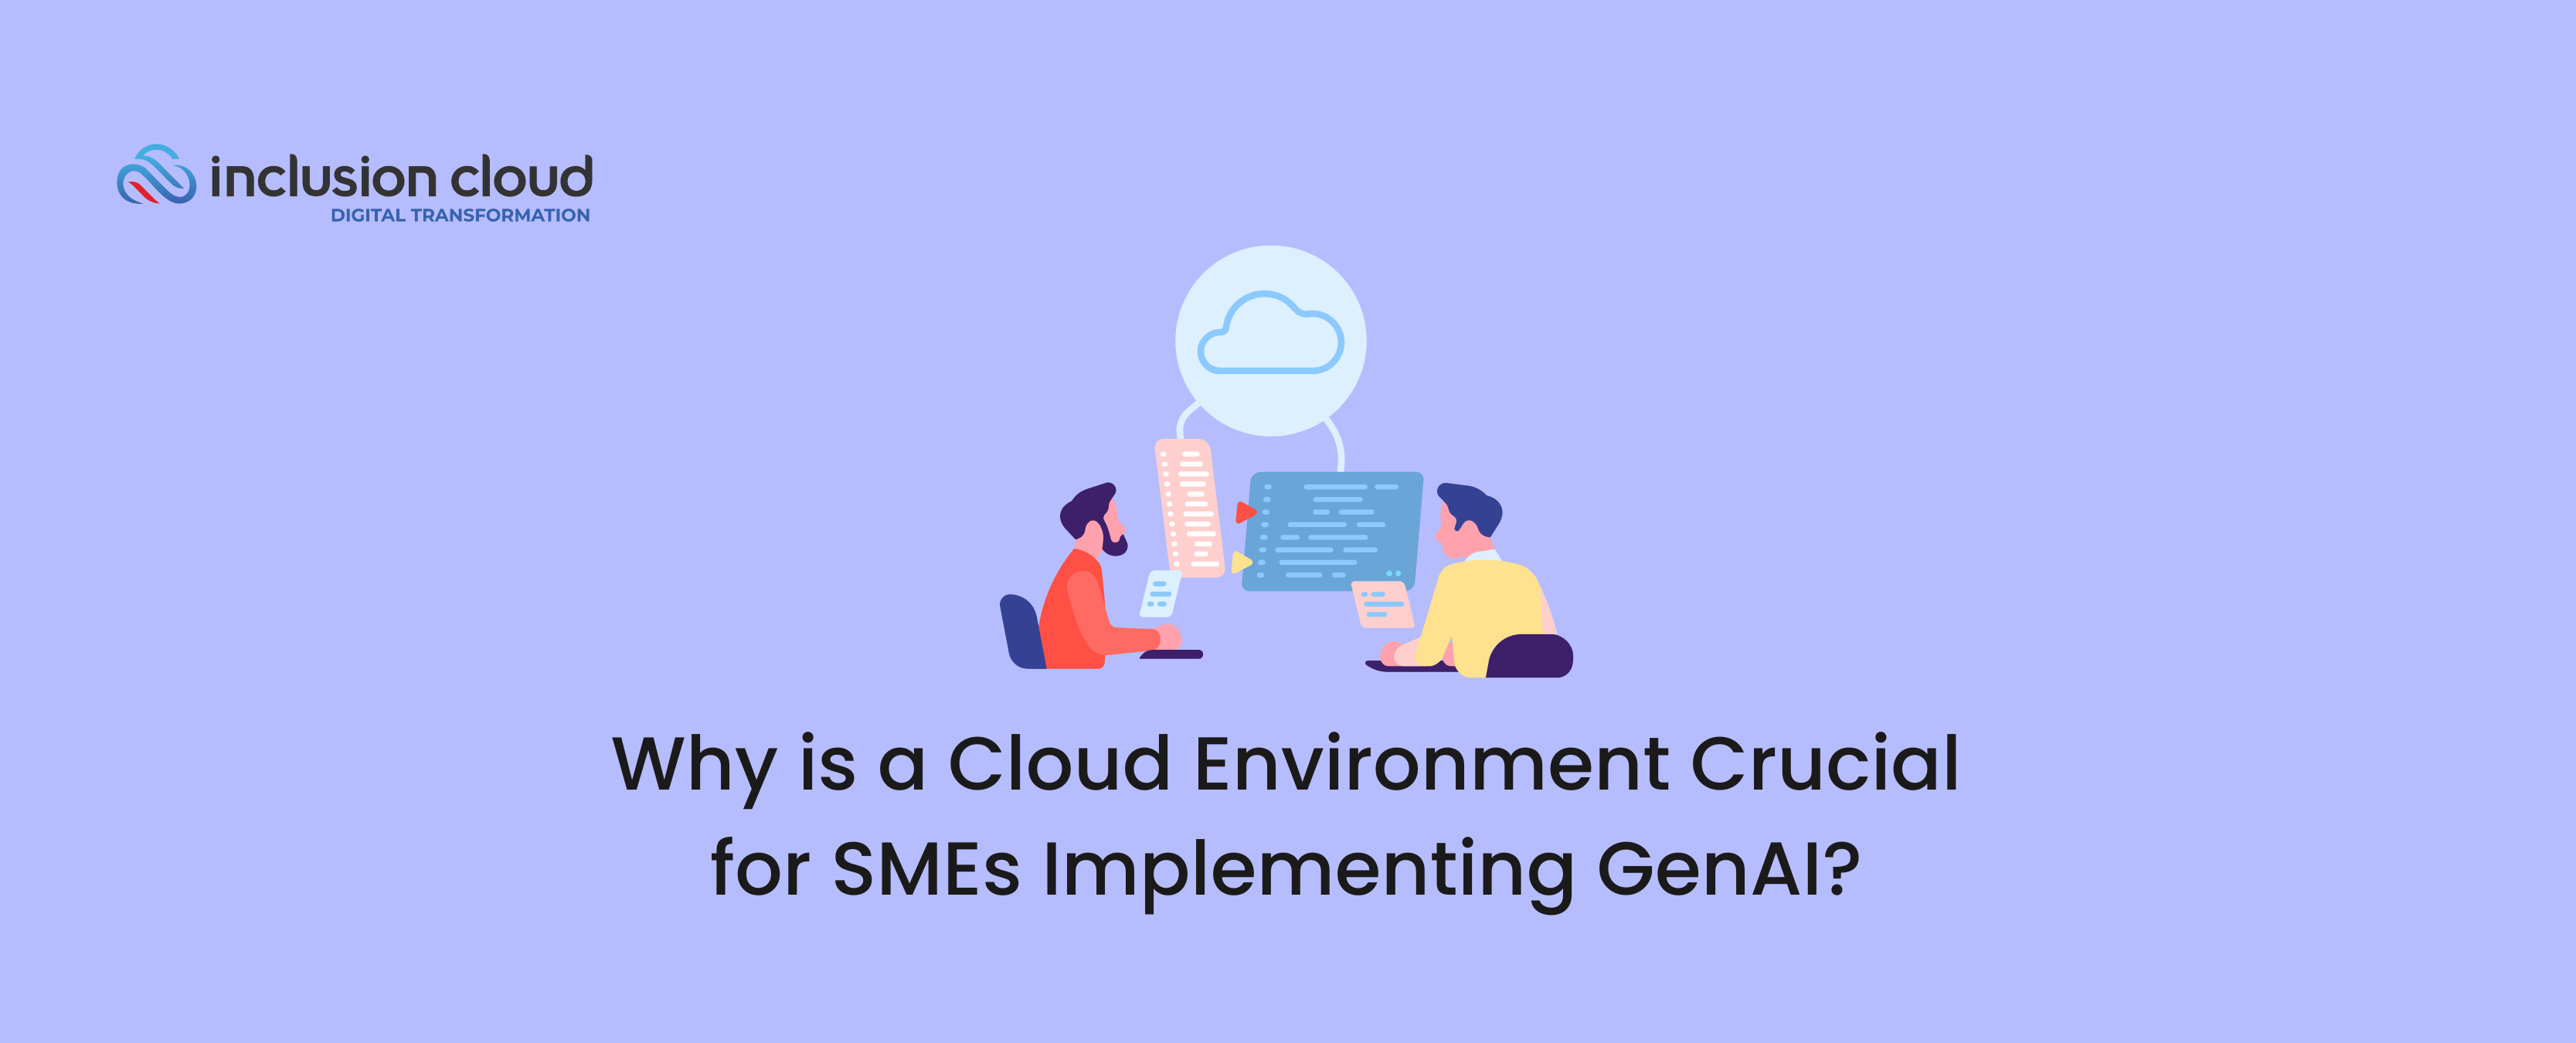 Why is a Cloud Environment Crucial for SMEs Implementing GenAI